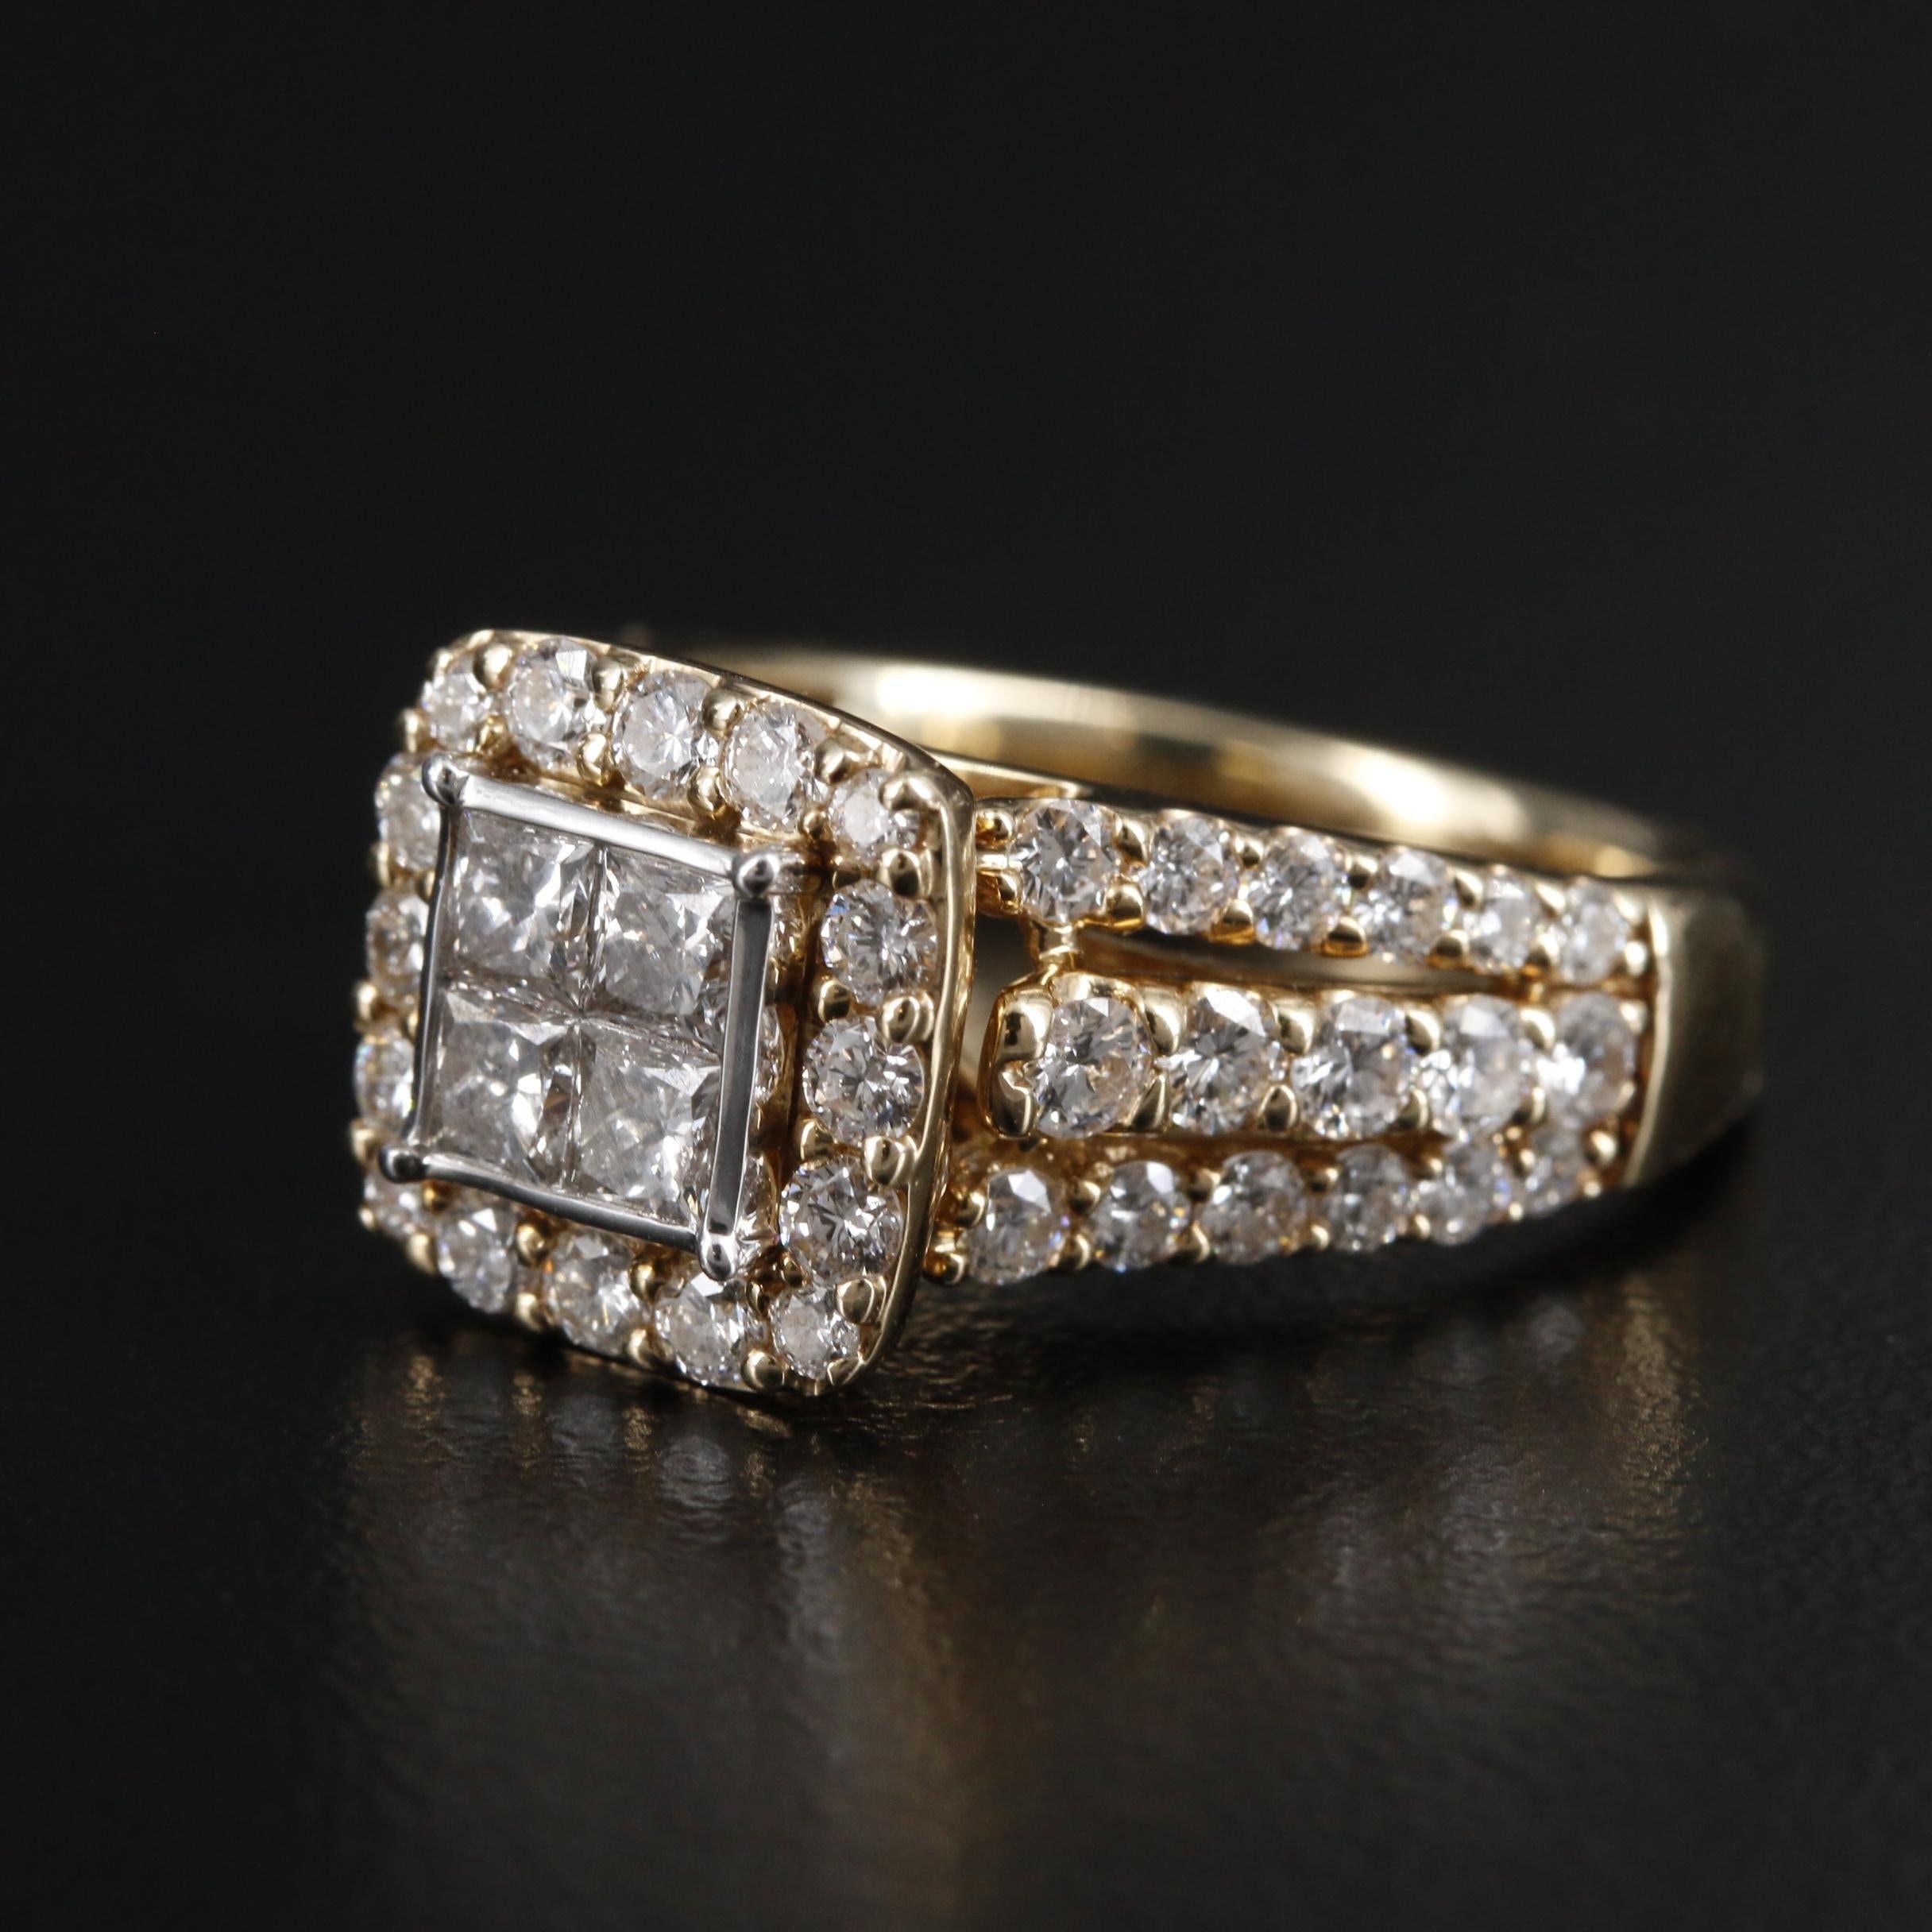 For Sale:  Art Deco Certified 2 Carat Natural Diamond Engagement Ring in 18K Gold For Men's 4